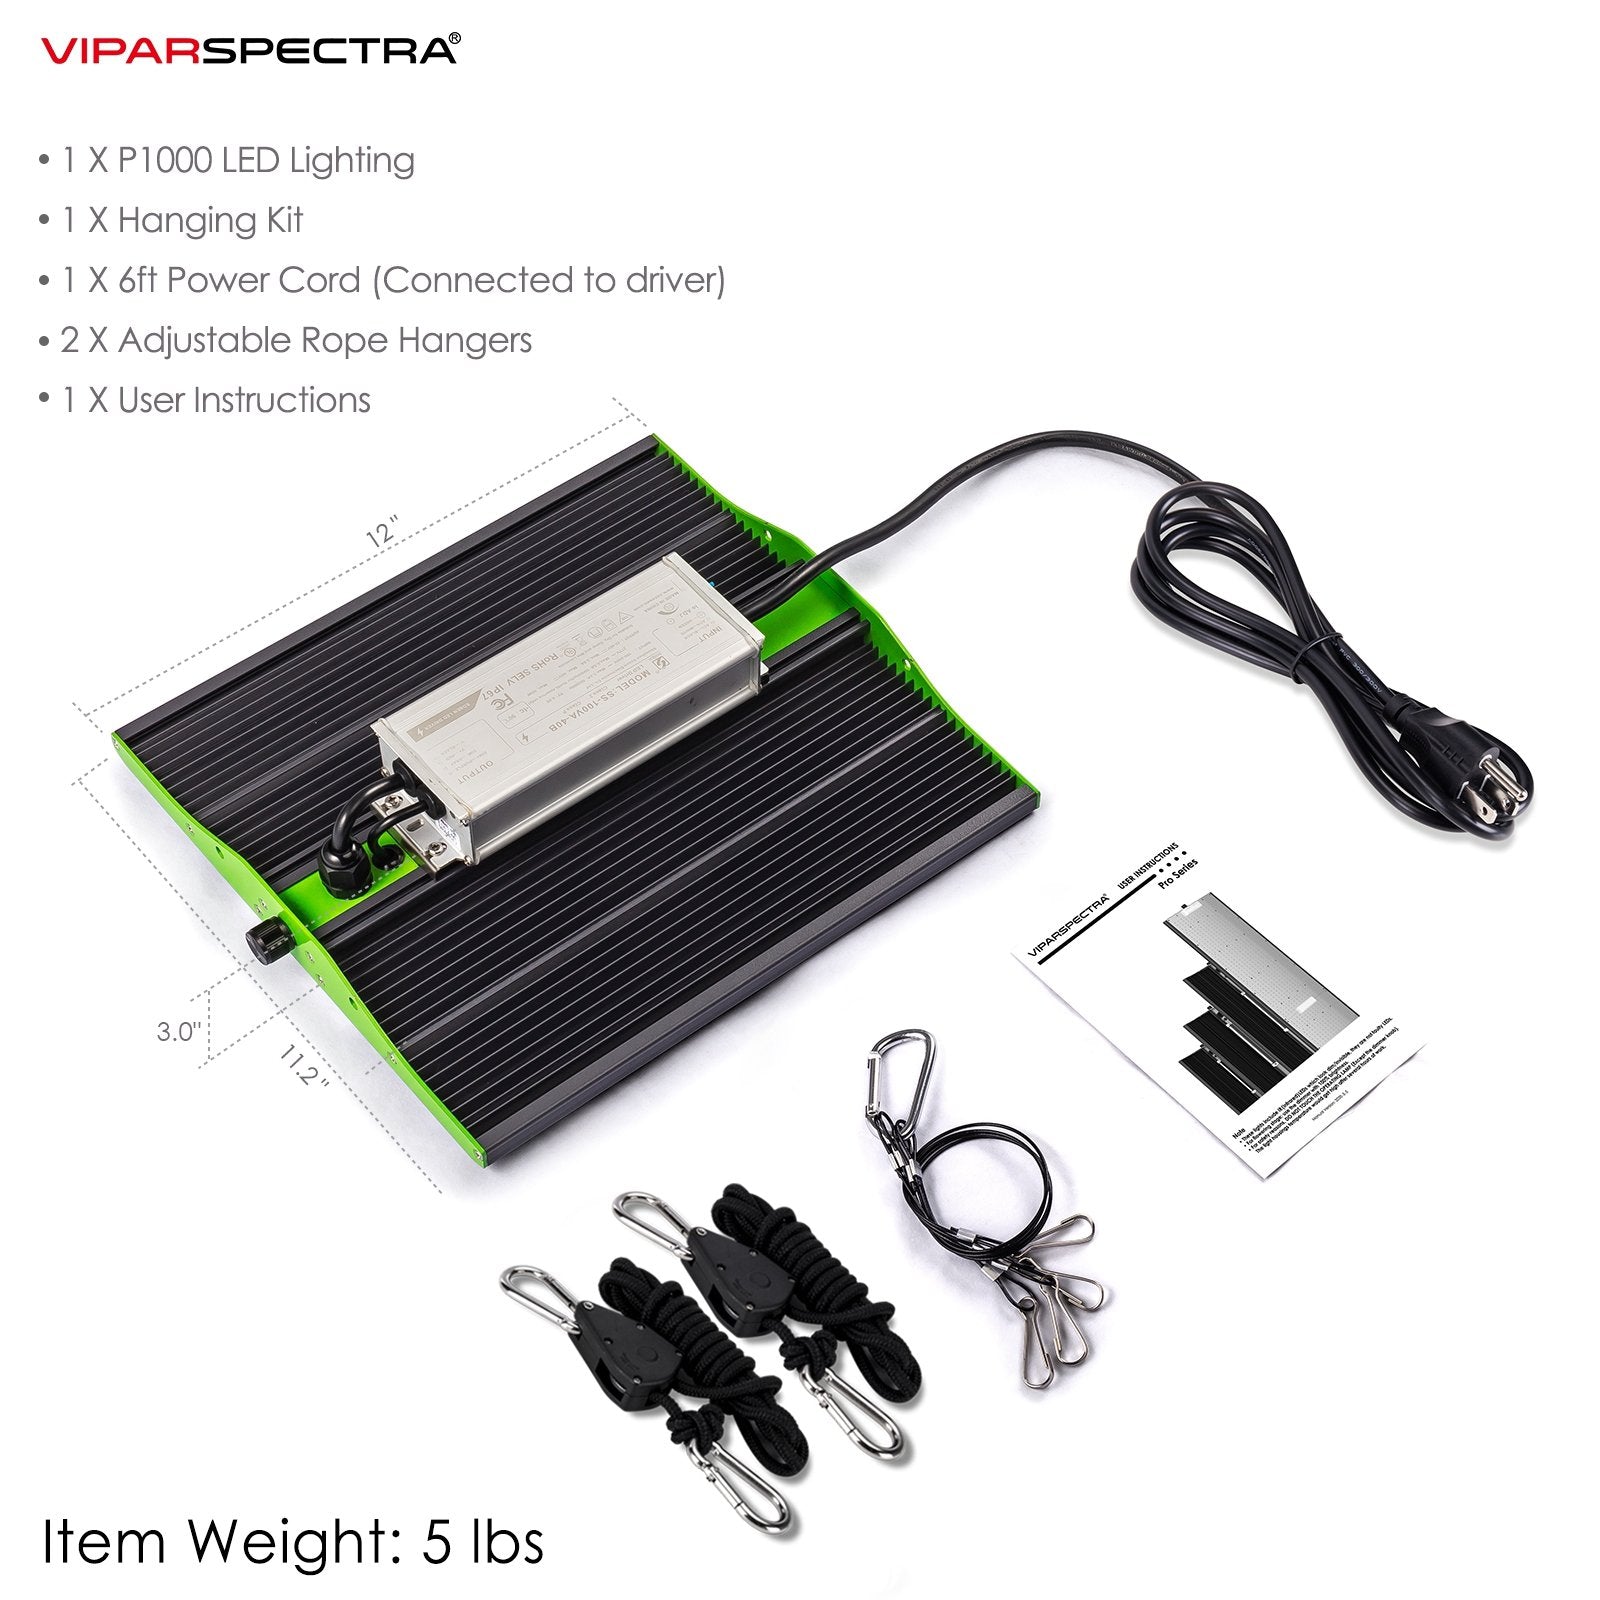 viparspectra-P1000-package